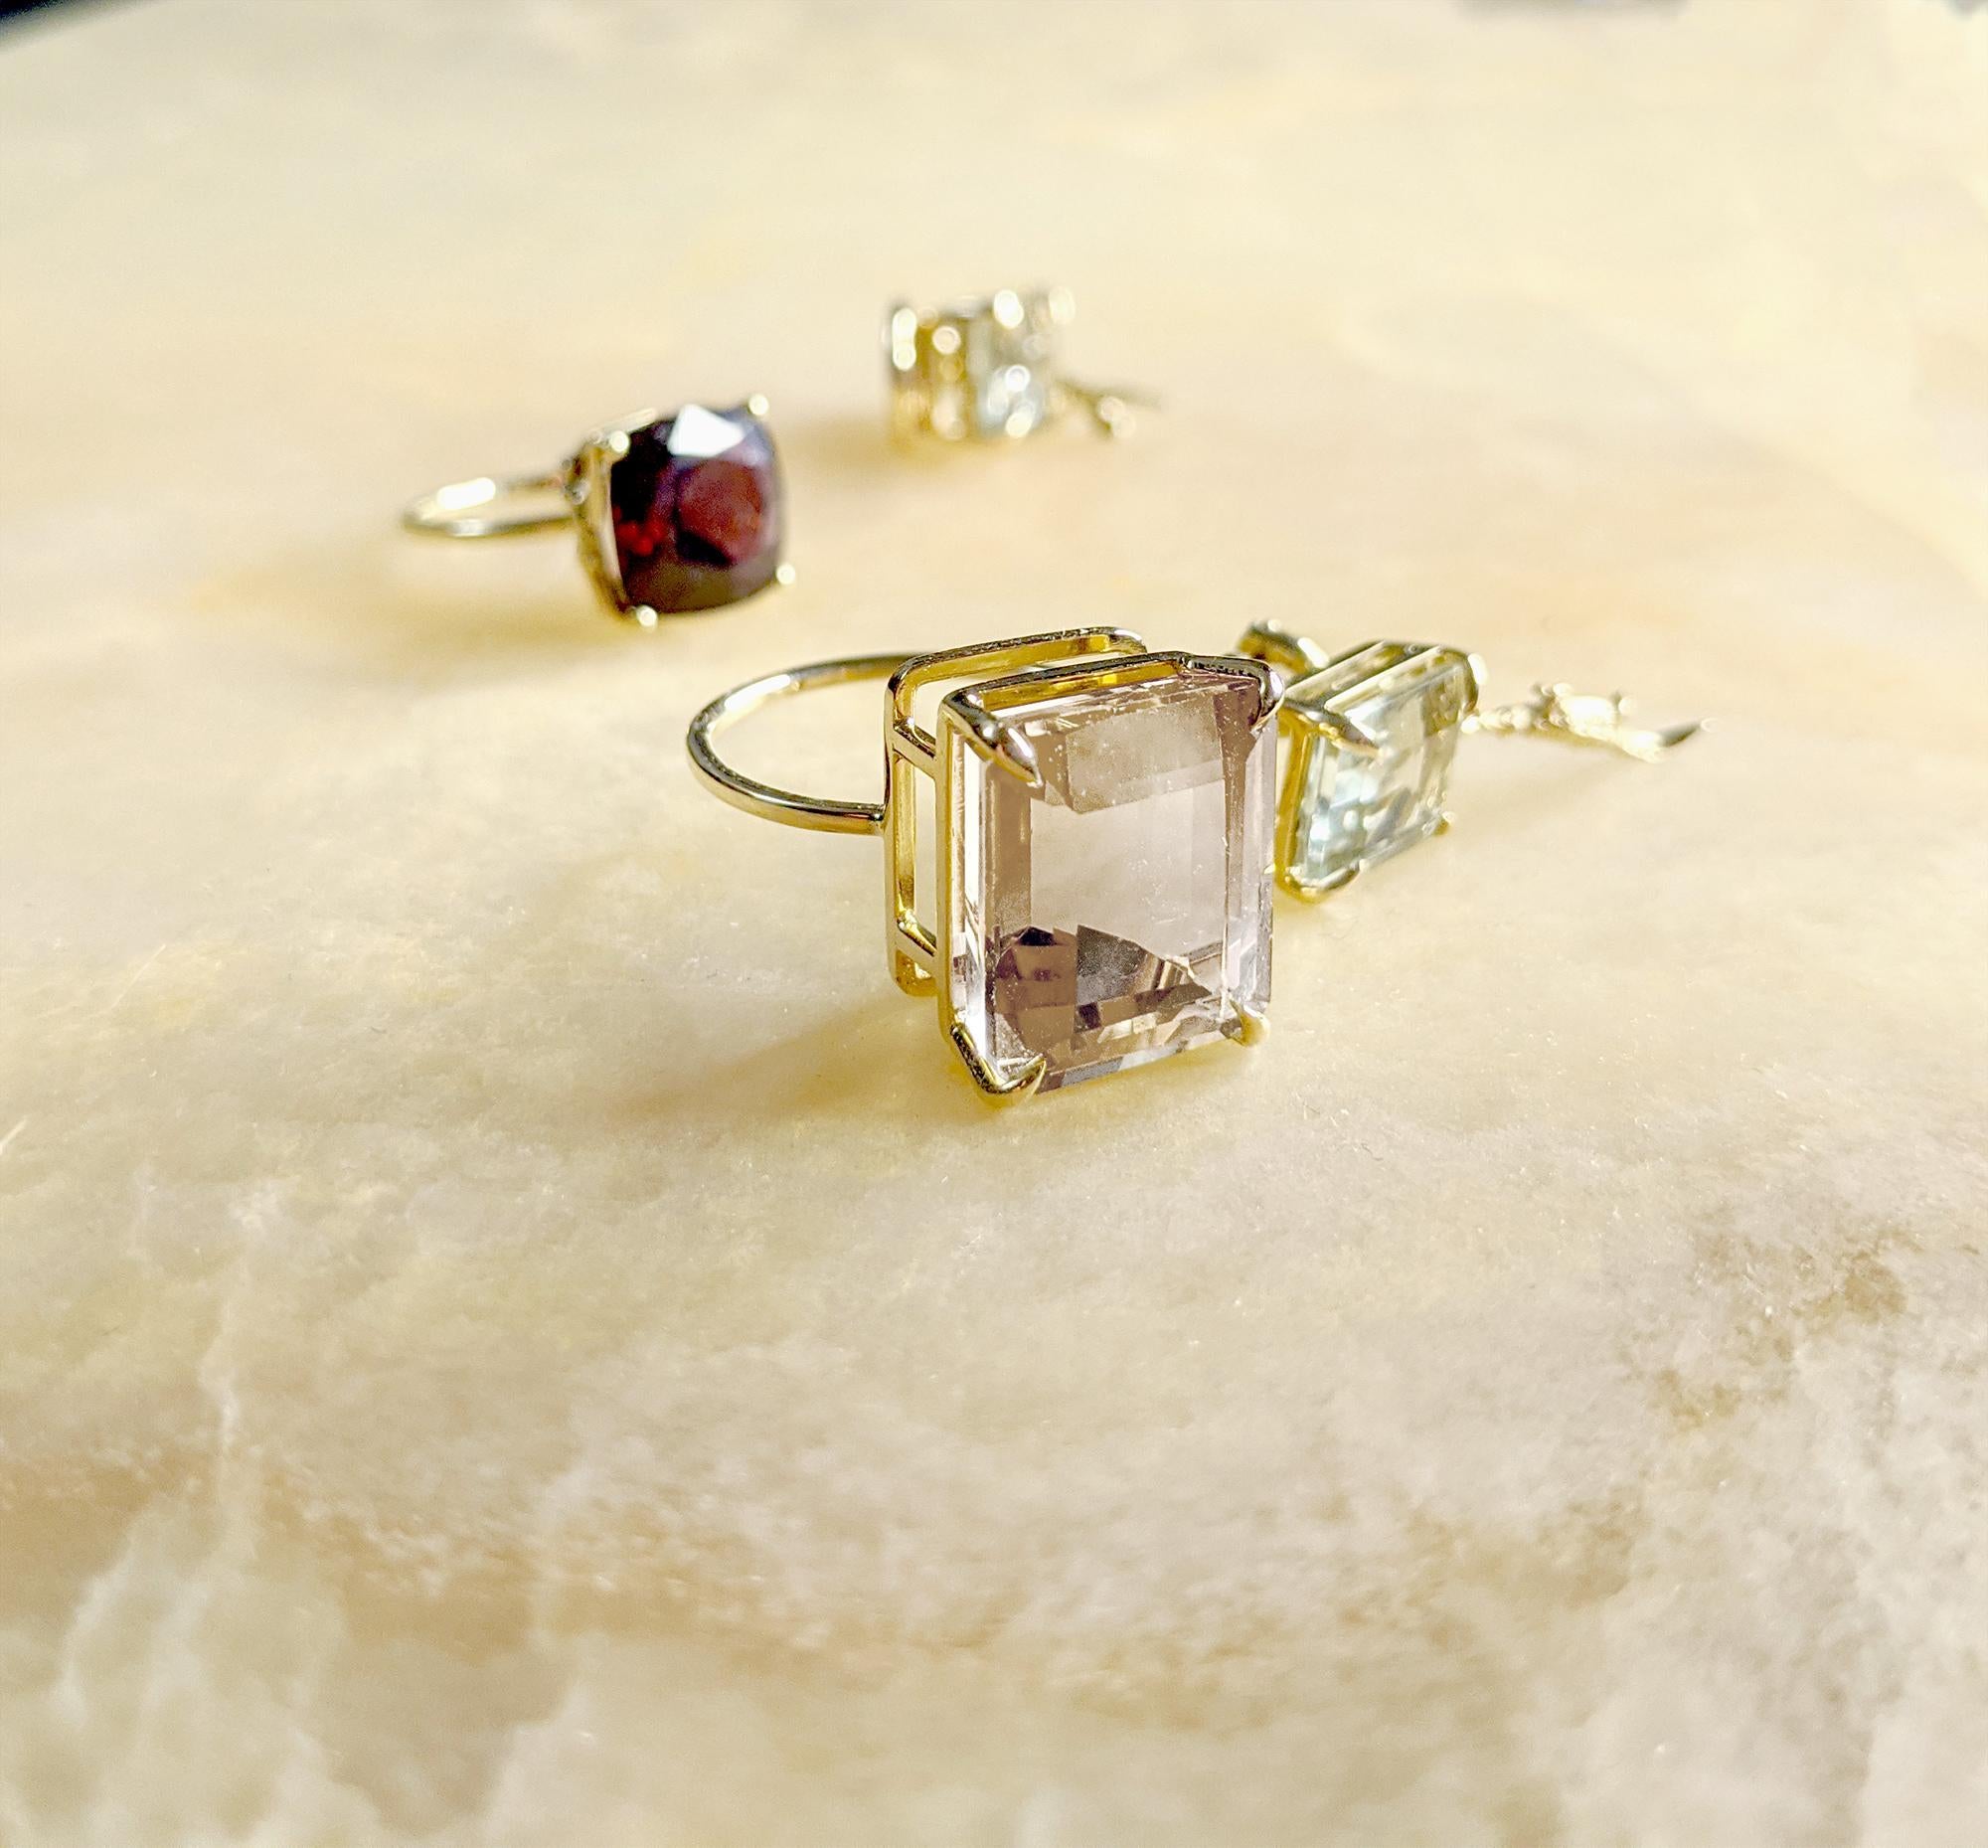 This ring features a huge emerald-cut kunzite set in 18-karat yellow gold. The size of the ring is custom-made to fit the wearer's finger. The large size of the gem is sure to catch attention, with its vivid and rich color, as well as the exquisite